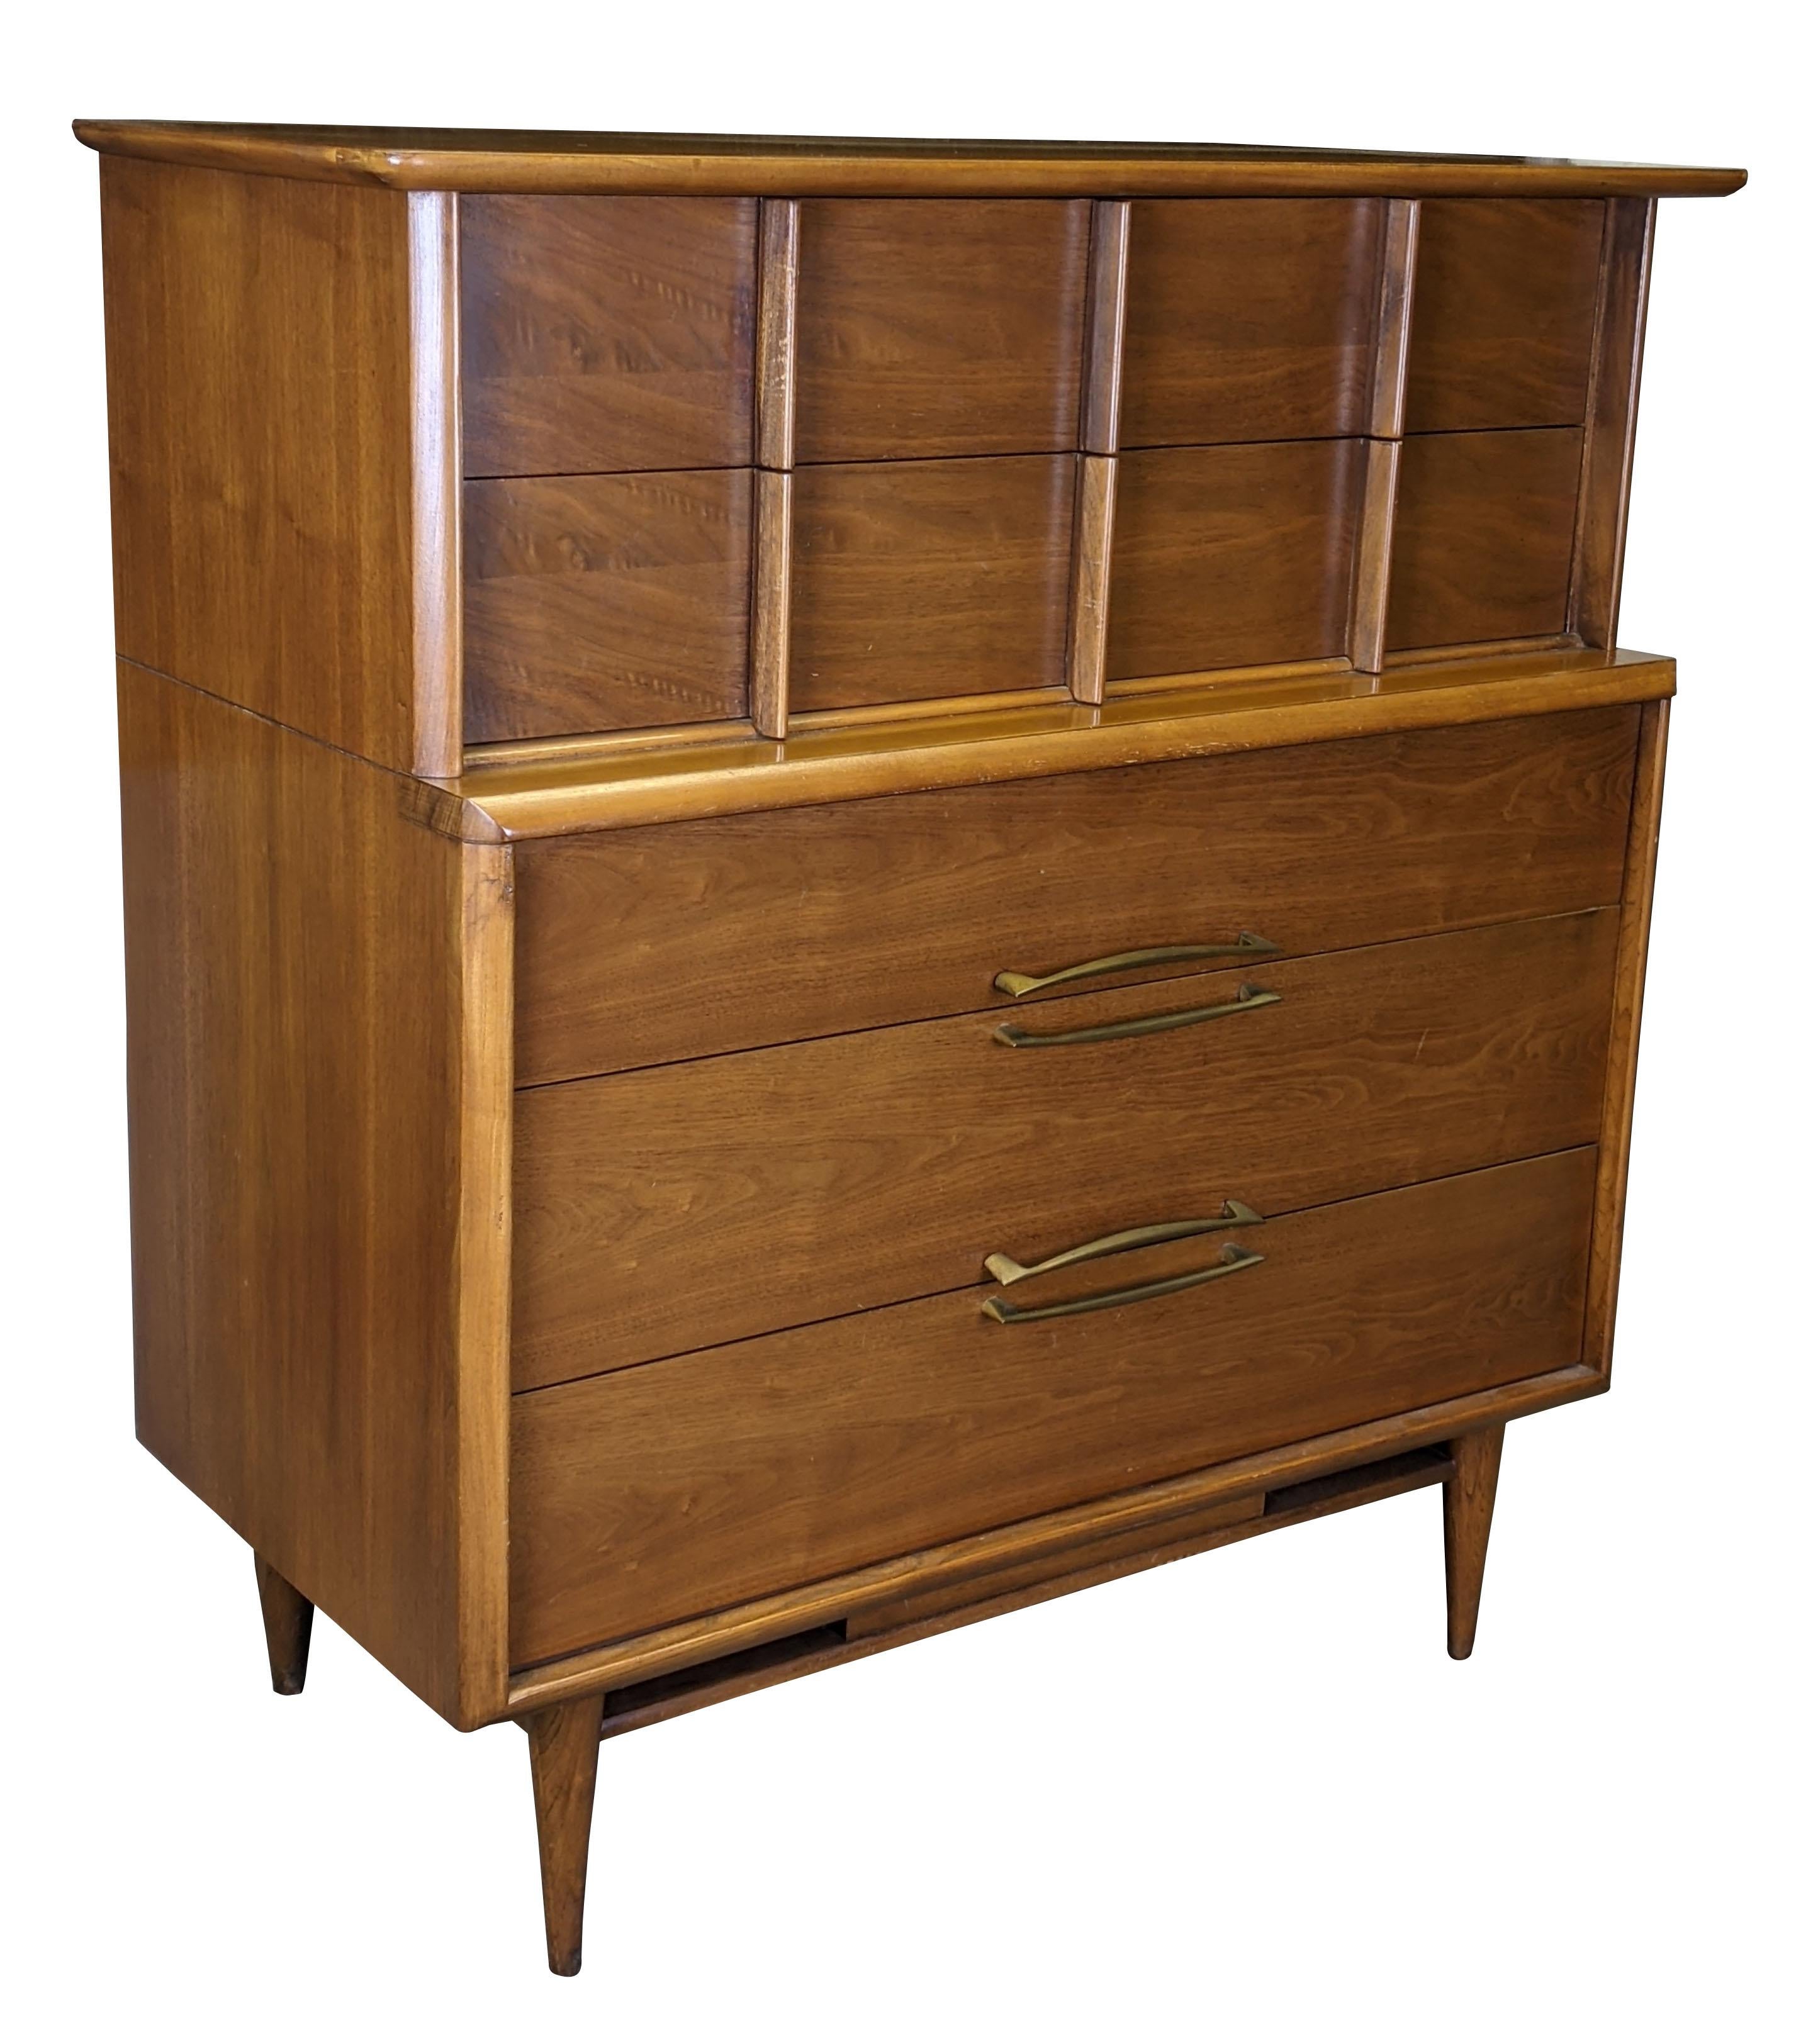 Vintage scuptural shaped dersser by Kent Coffee. Made from continiental walnut with dovetailed drawers and tapered legs. Circa 1960s. #6900.
     